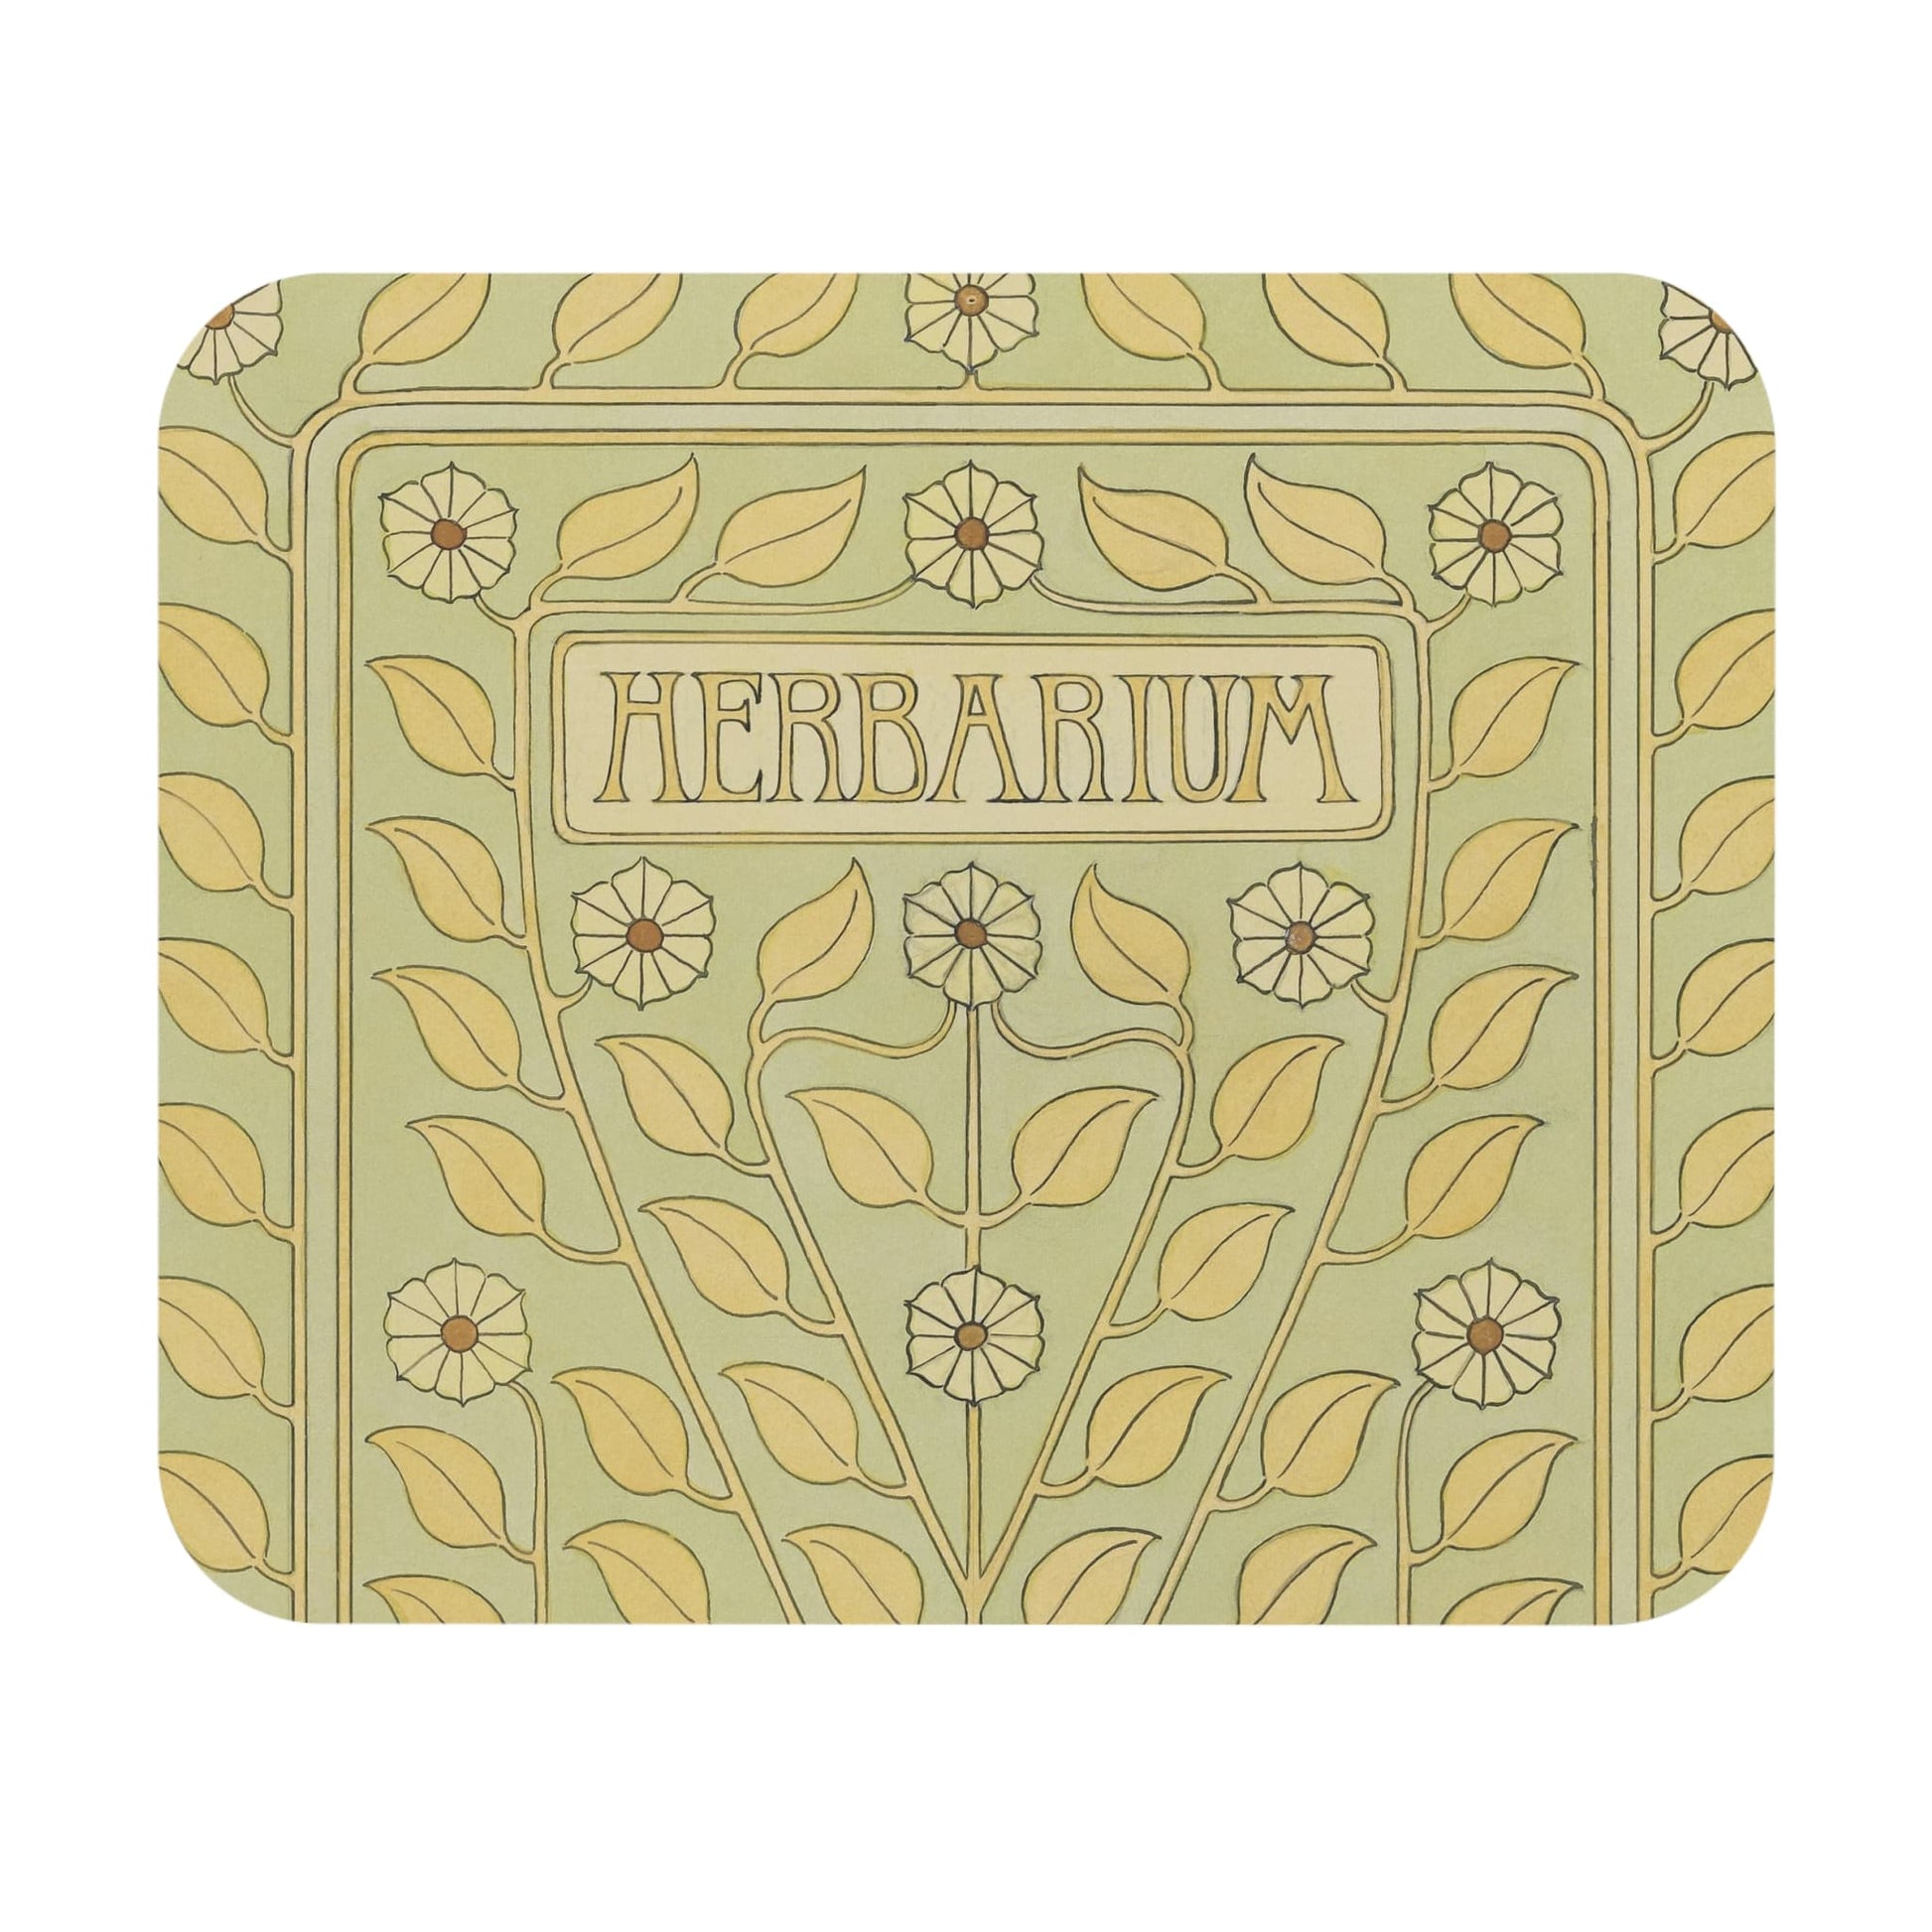 Plant Aesthetic Mouse Pad showcasing floral pattern art, perfect for desk and office decor.